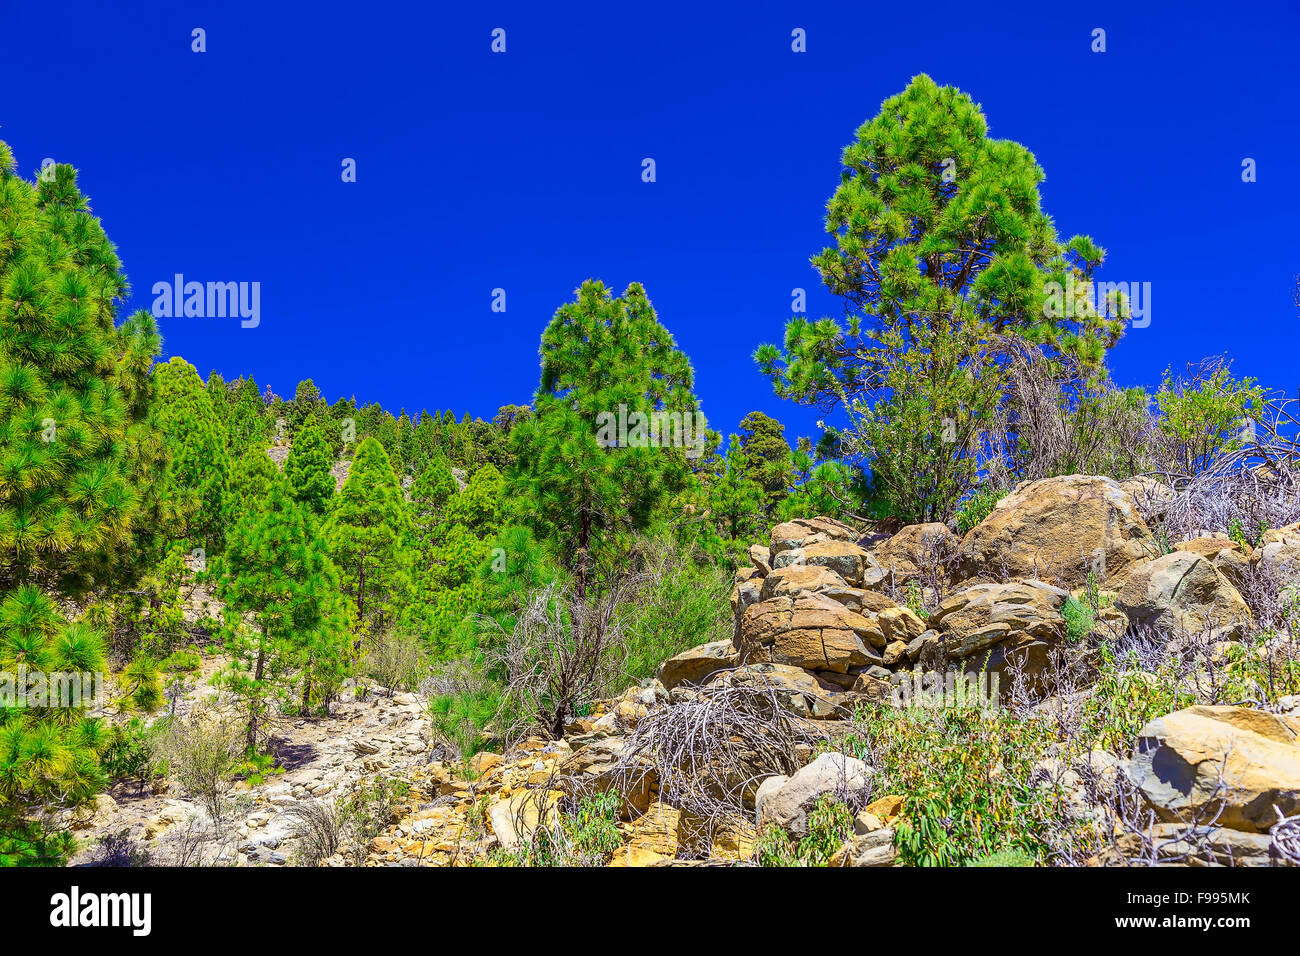 Green Fir Trees on Mountain Landscape on Canary Island in Spain Stock Photo